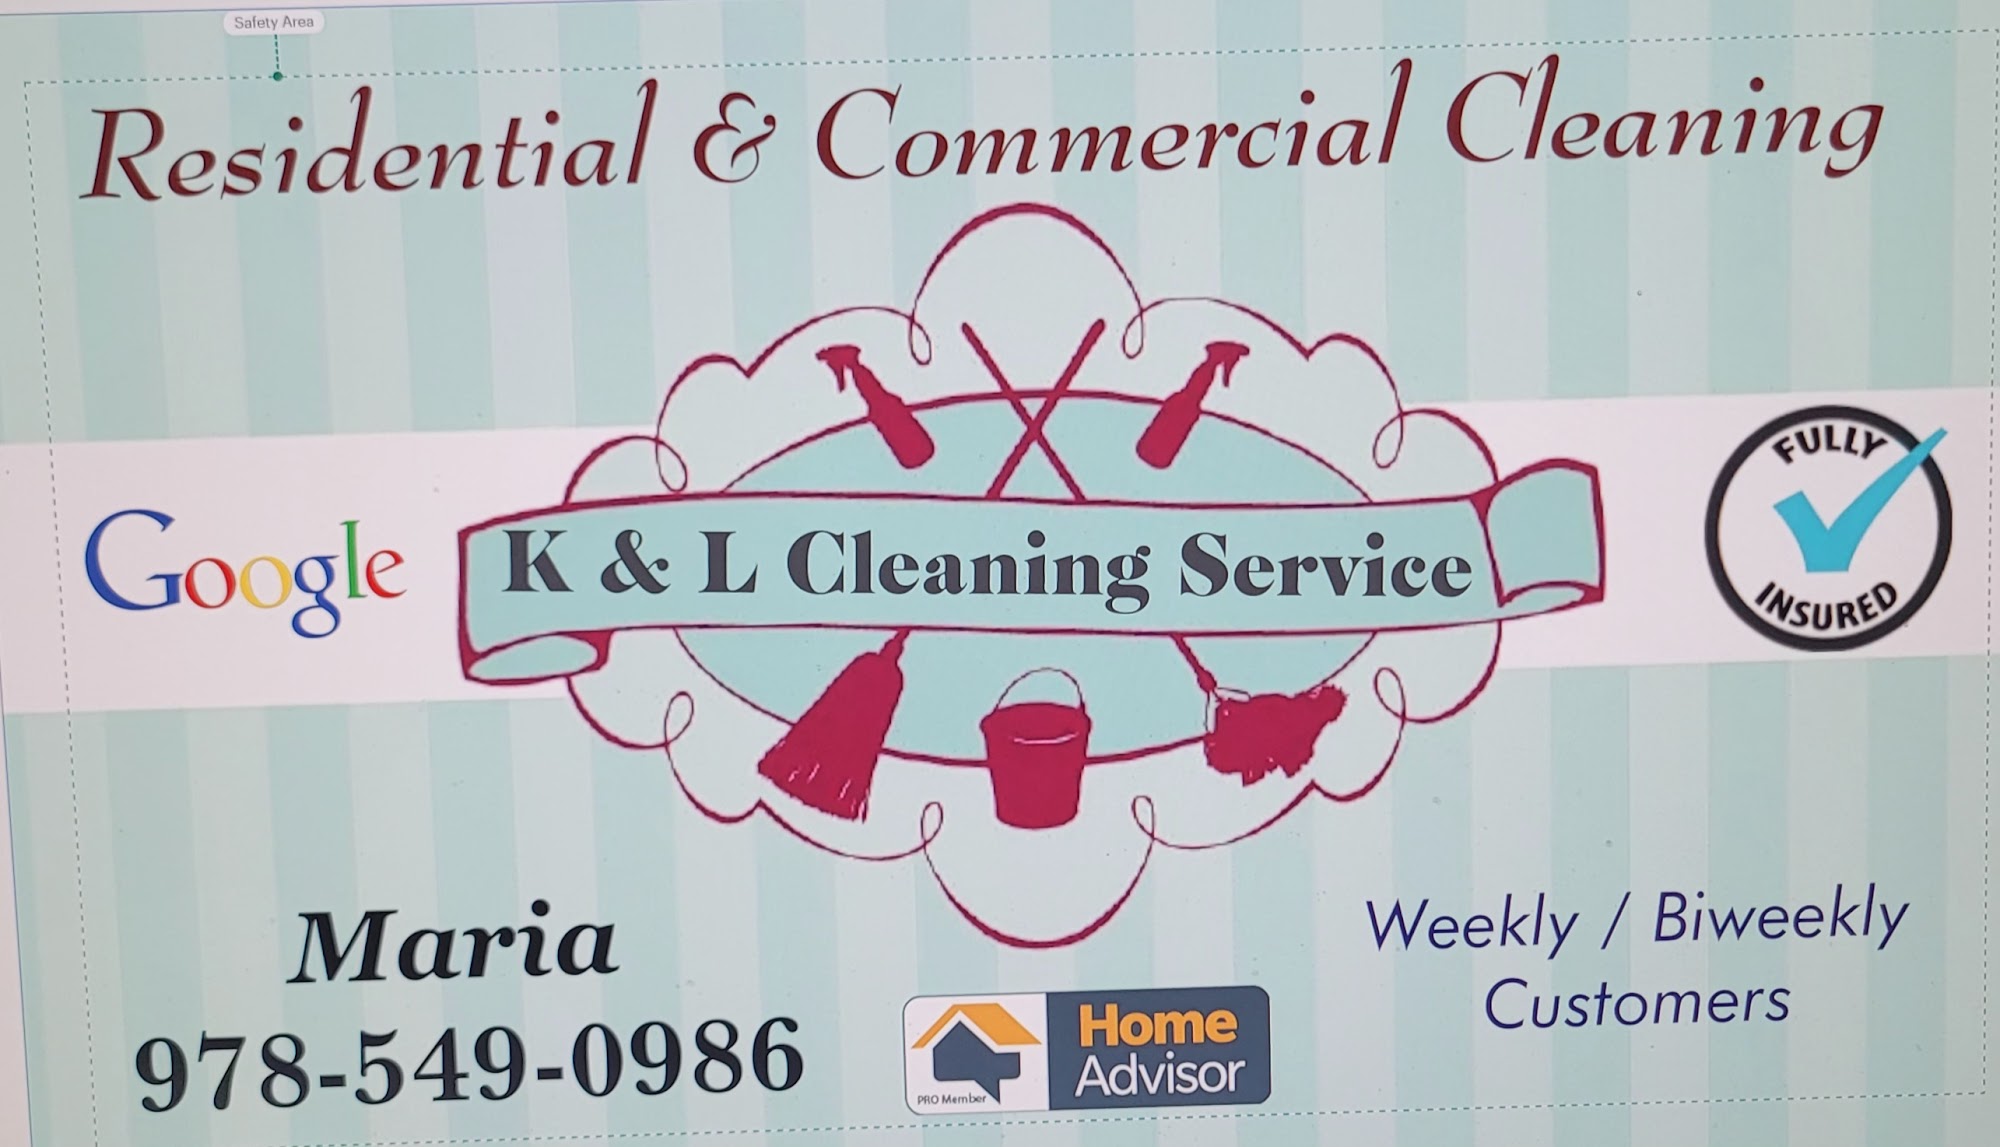 K & L Cleaning